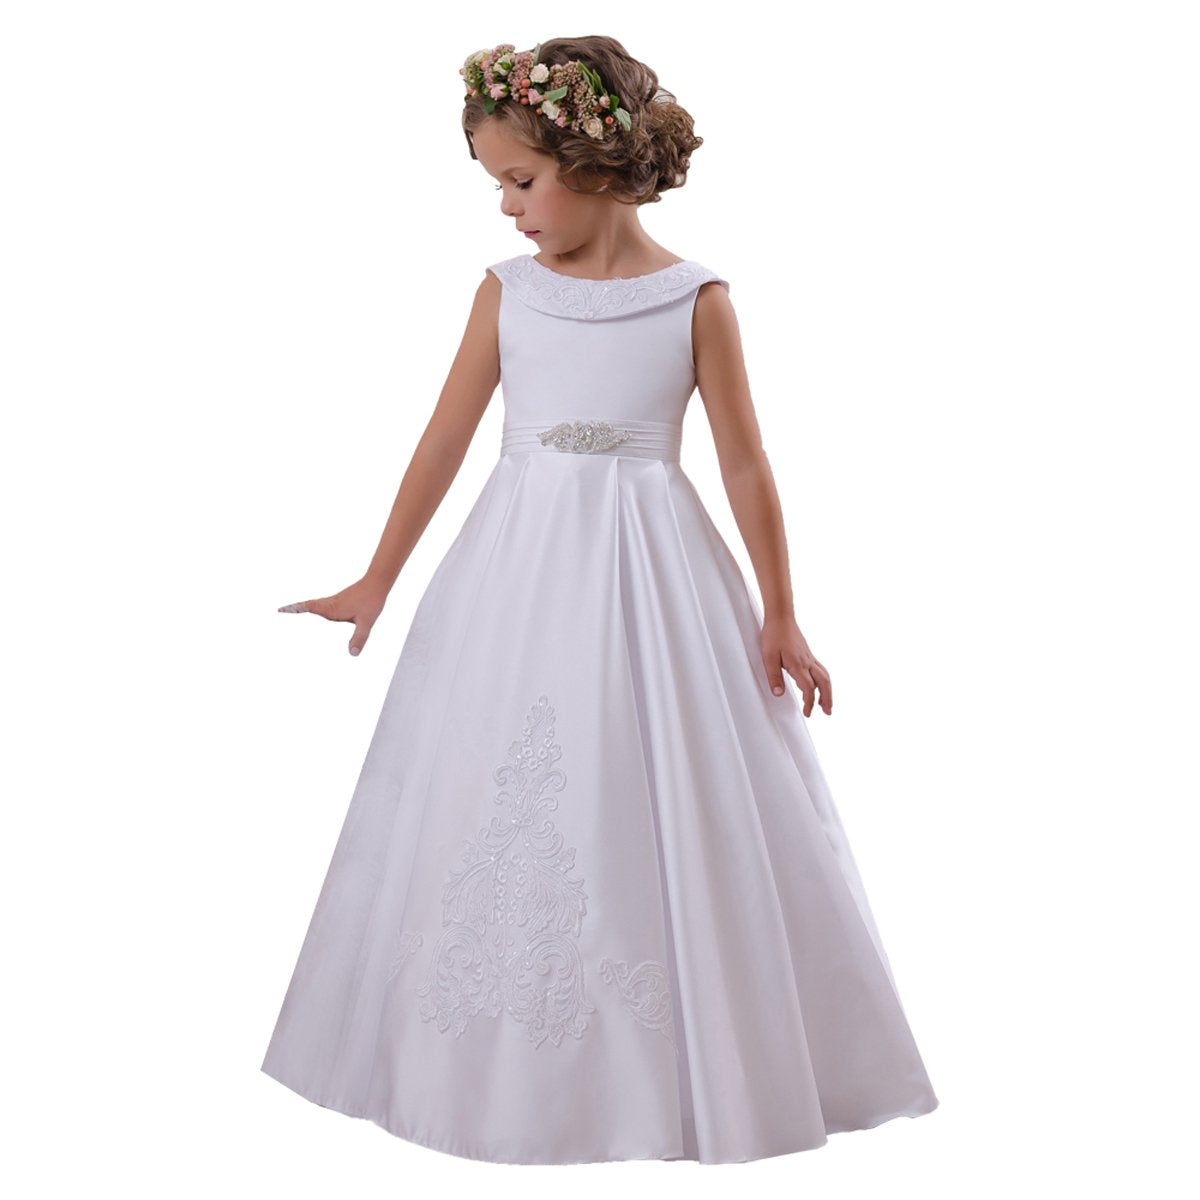 little girls dresses Elegant O-Neck Sleeveless kids ball gown A-Line Stain Party Wedding Dresses for Girls 2-12 Year Old